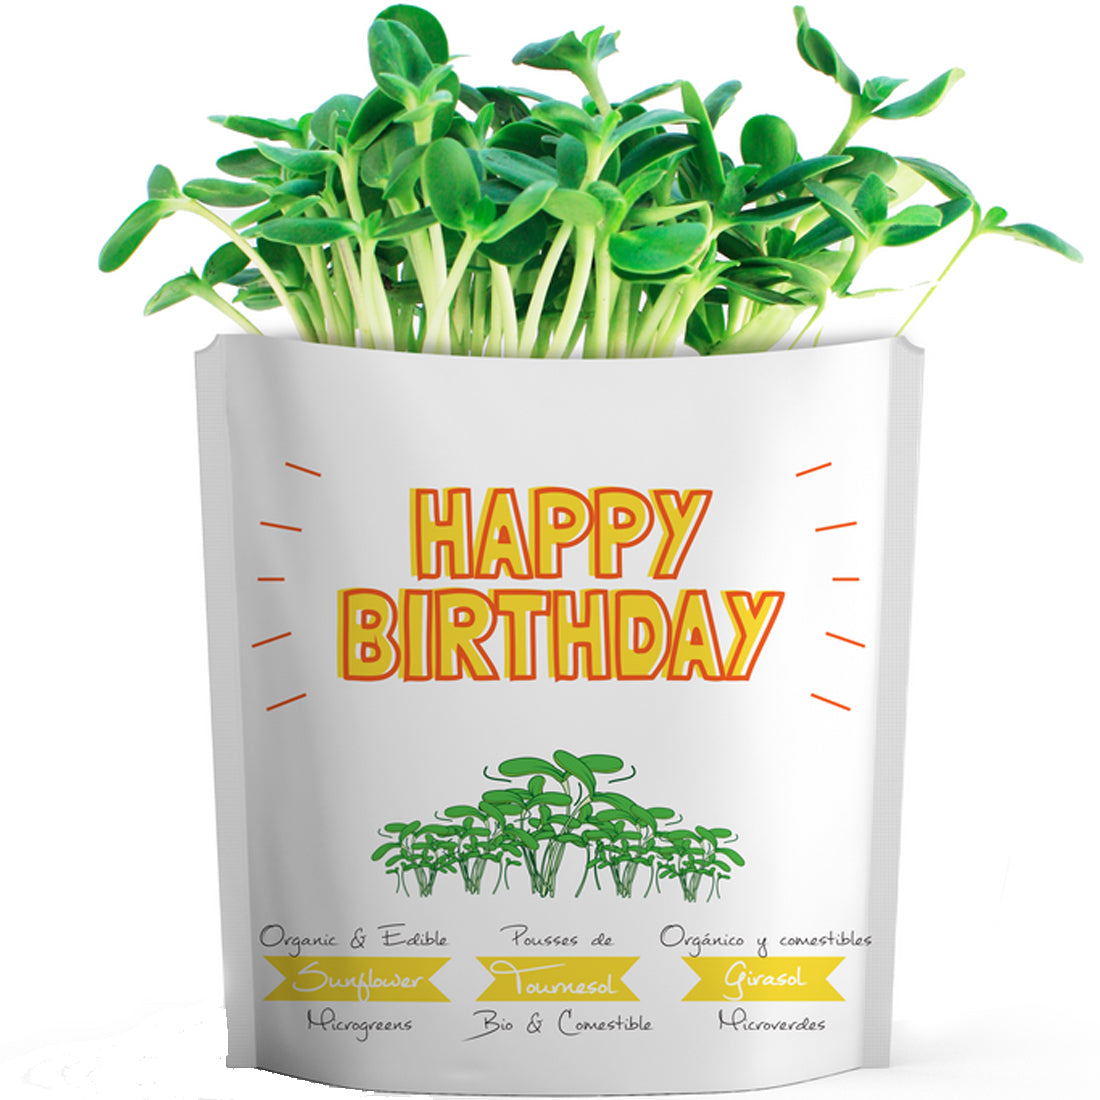 Gift A Green Greeting Cards, Happy Birthday Card, Sunflower Microgreens